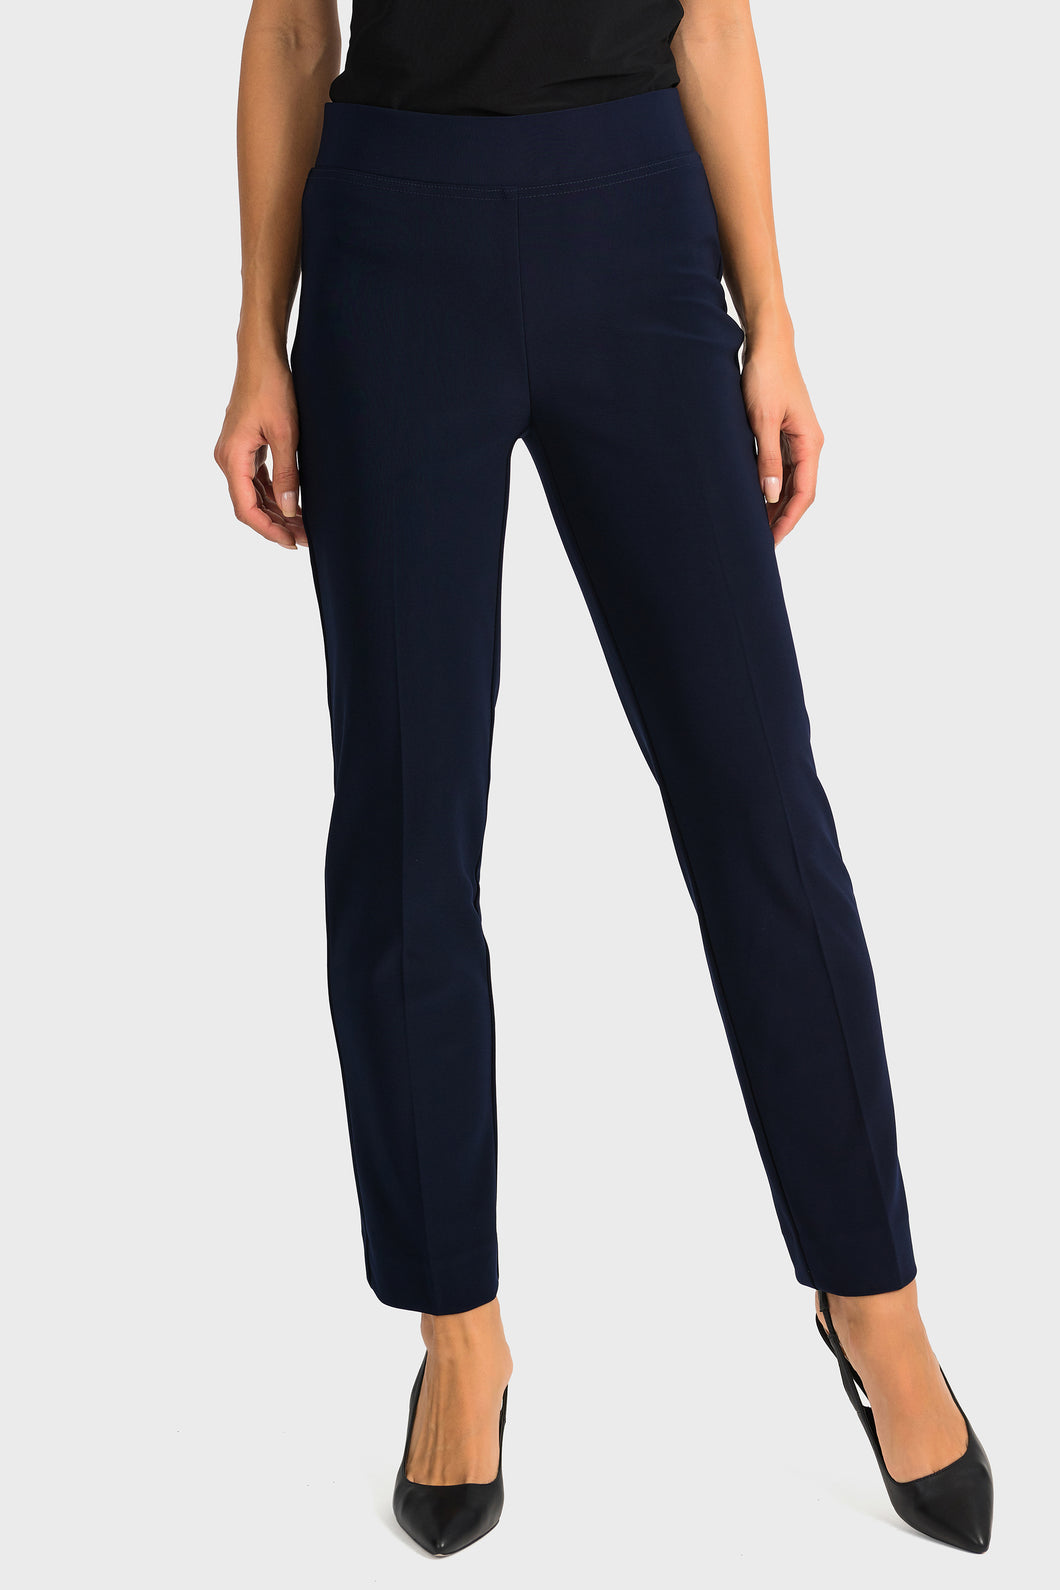 Joseph Ribkoff - Luxury Jersey Navy Pull On Trousers With Back Split